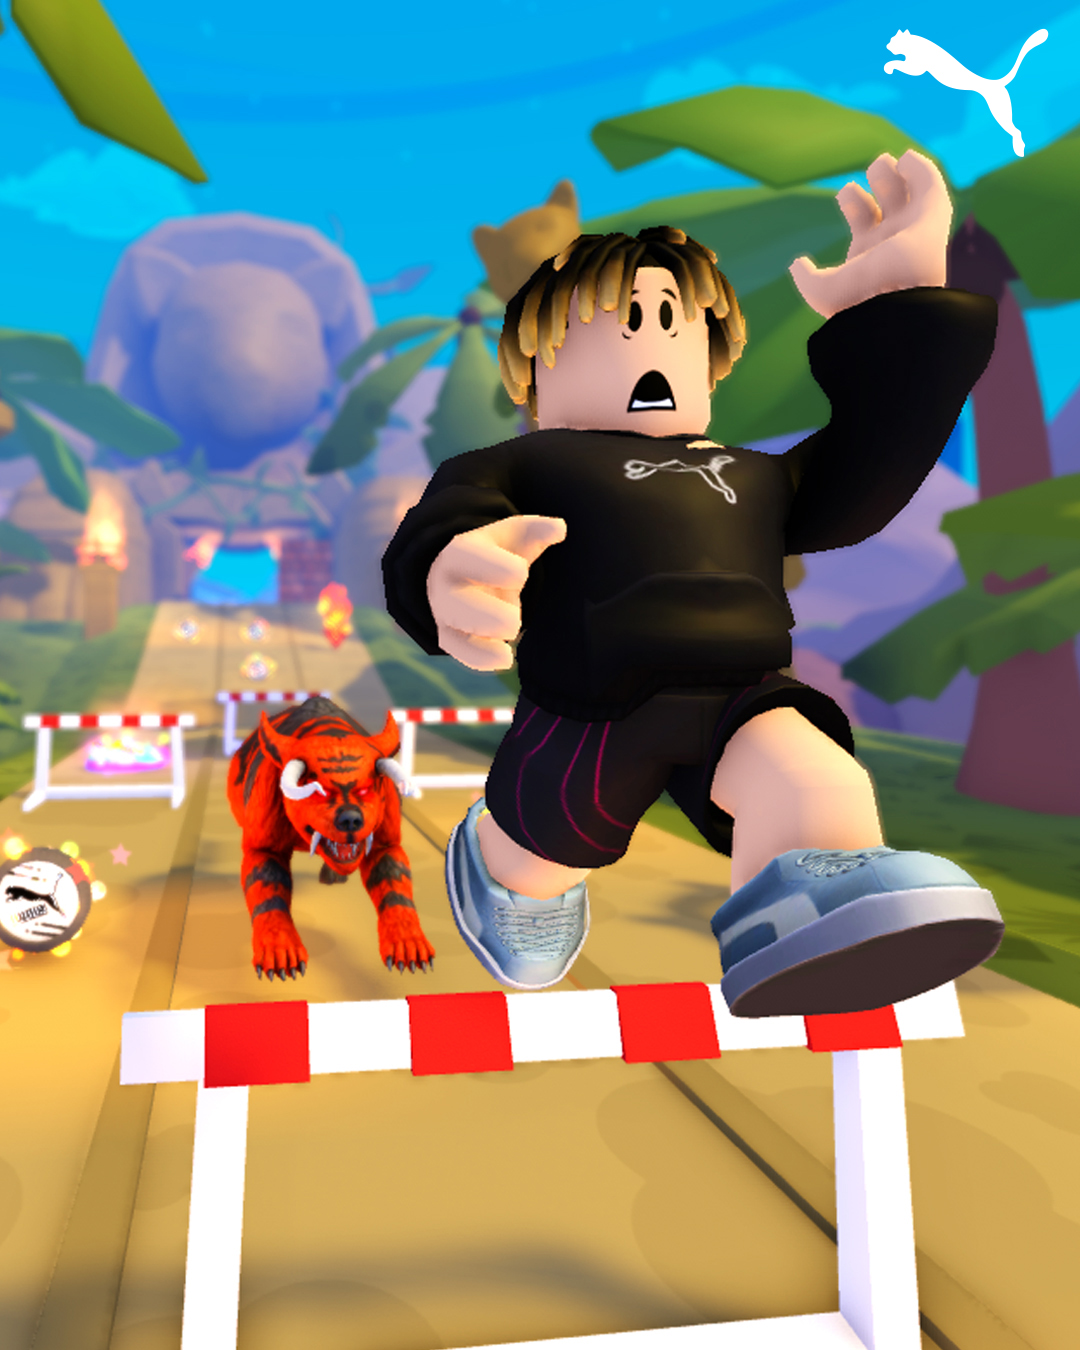 PUMA and the Land of Games”: New Virtual Place on Roblox for PUMA